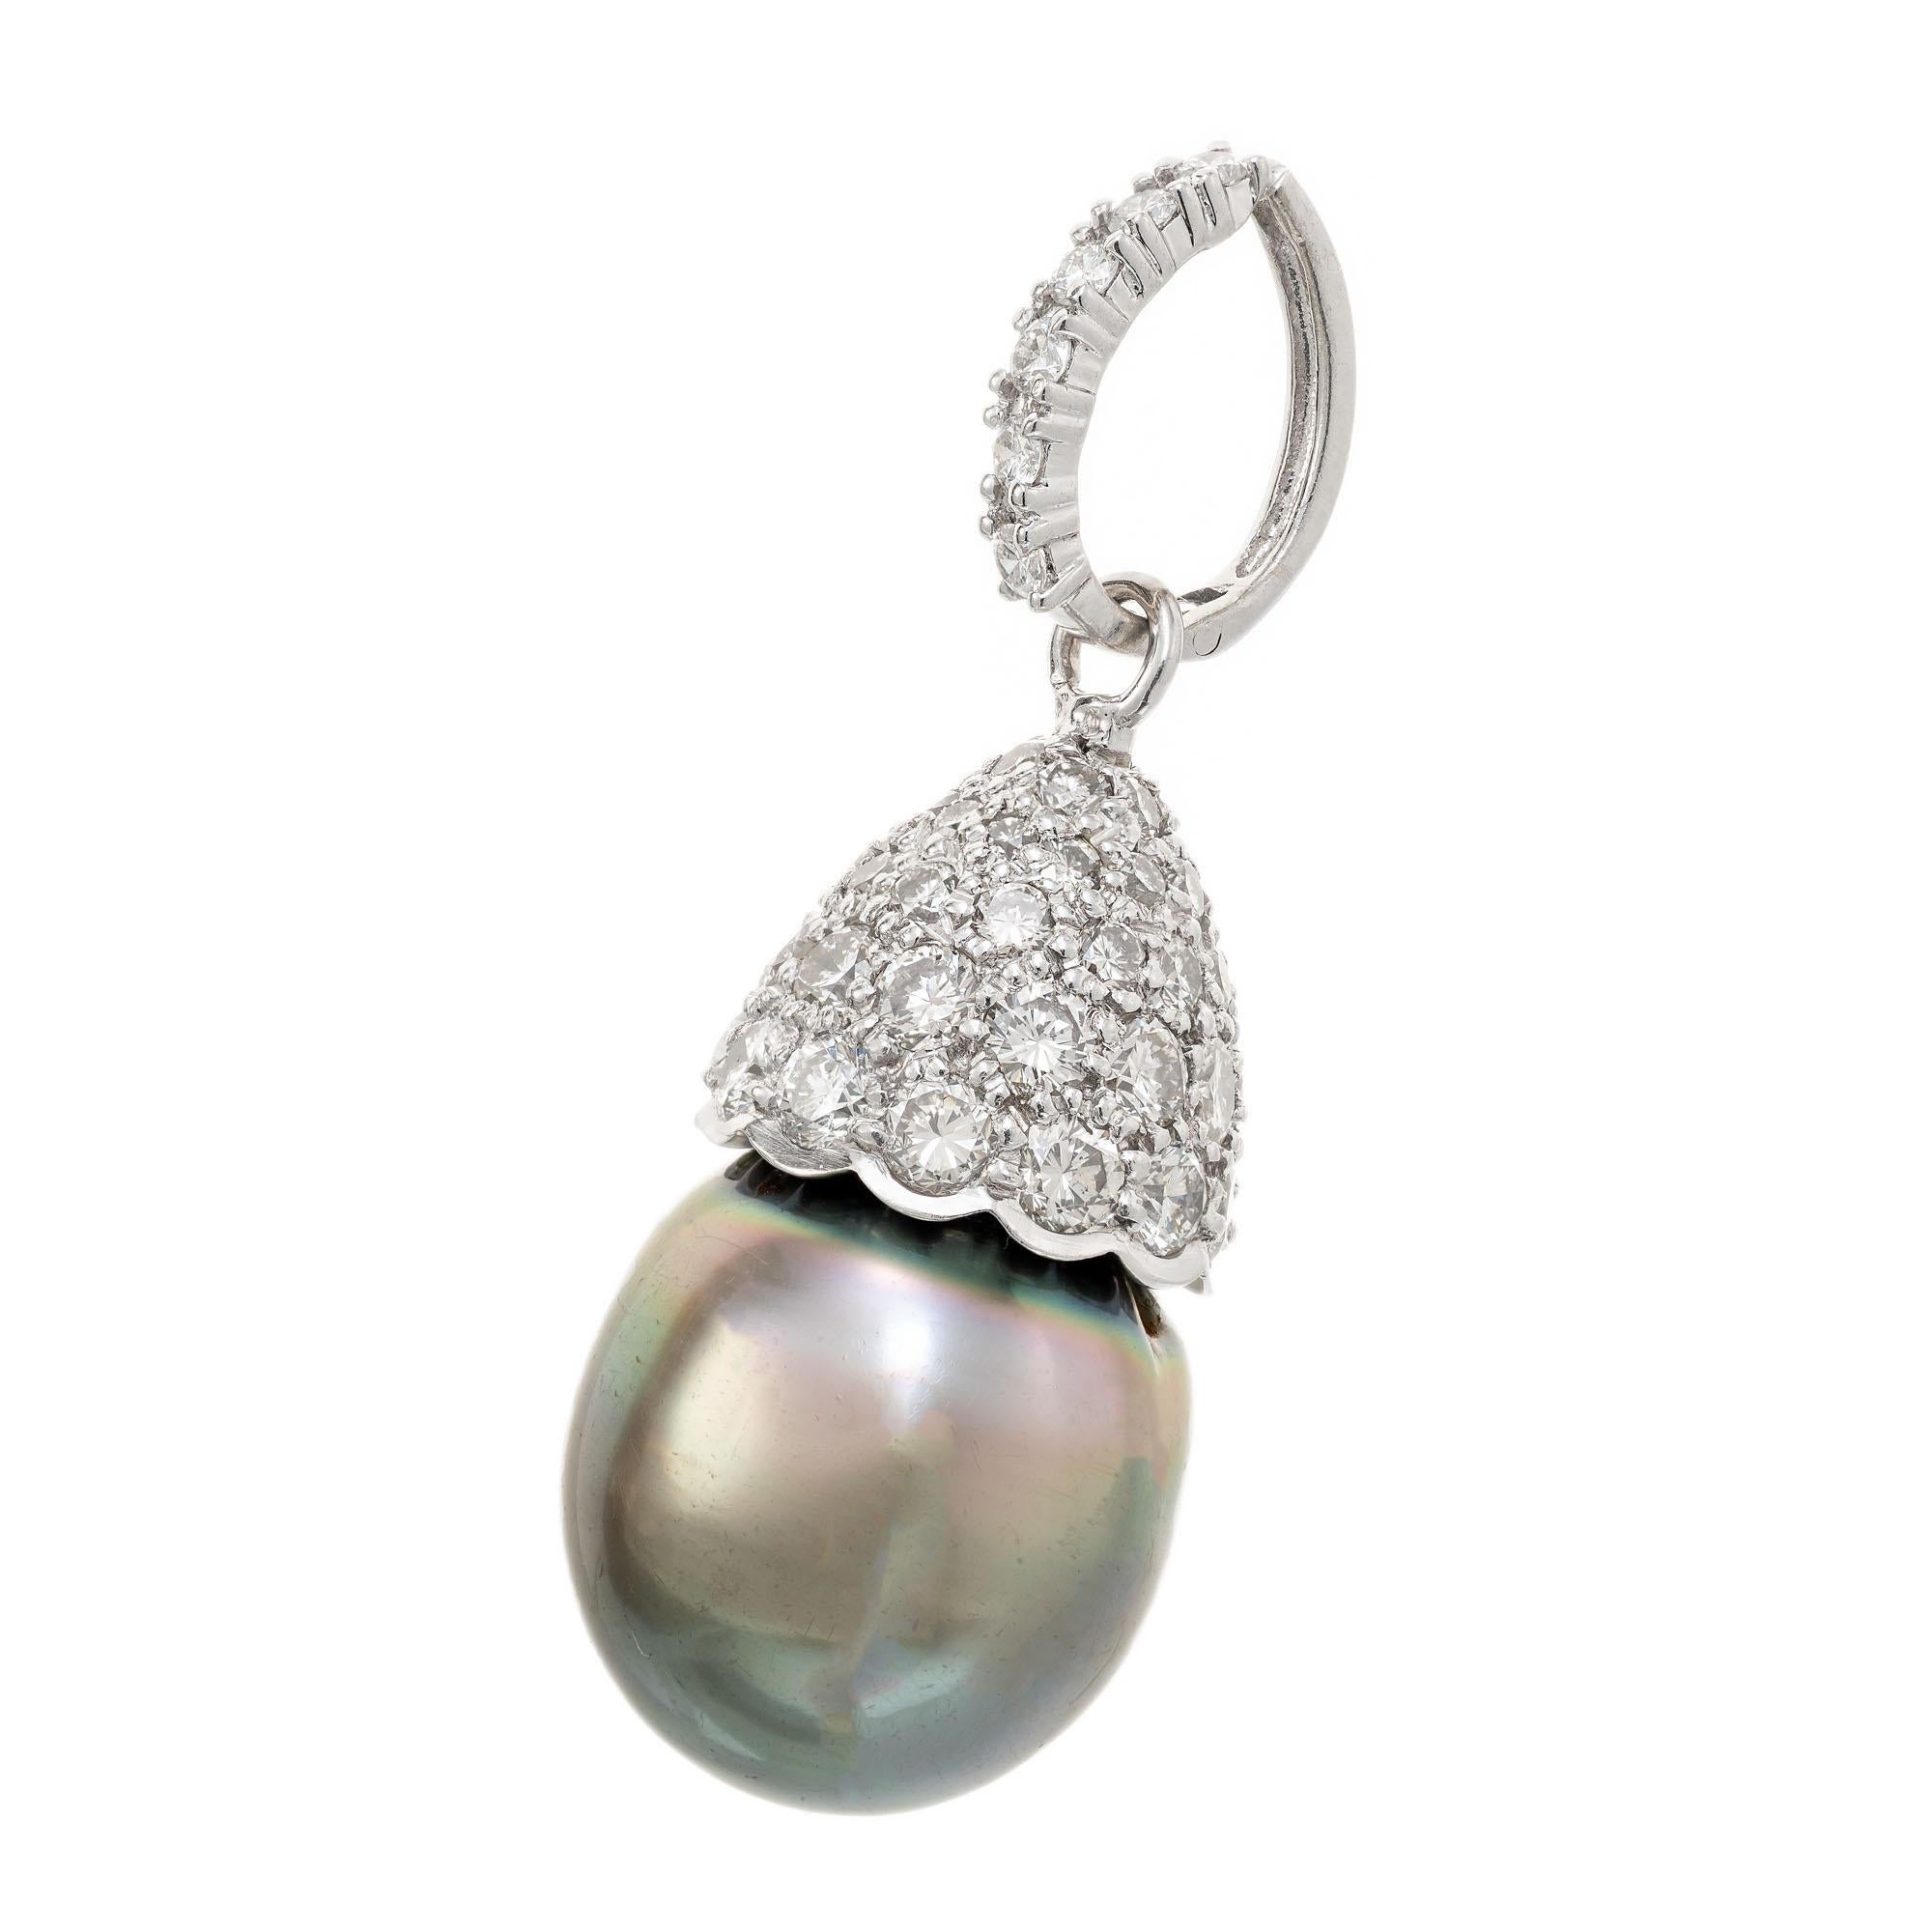 Grey South Sea pearl with a diamond cap and hinged enhancer top set with two carats of bright round brilliant cut diamonds.

60 round brilliant cut diamonds, G-H SI approx. 2.00cts
1 South Sea grey pearl, good lustre, few blemishes 13.2mm x 16mm
14k